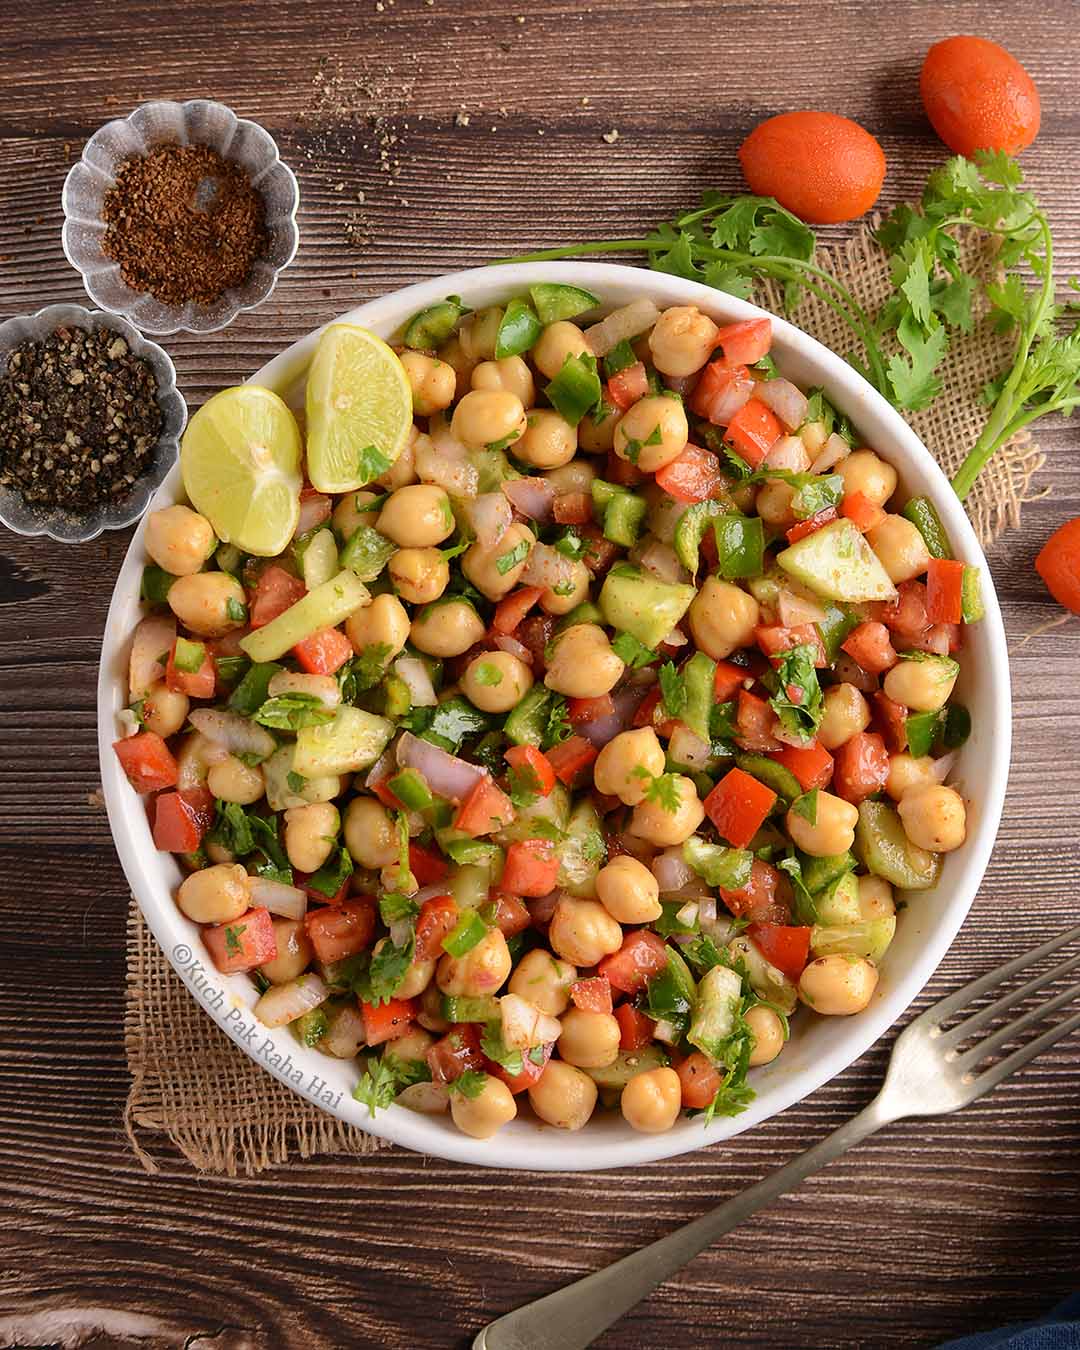 Chickpea salad for weight loss.